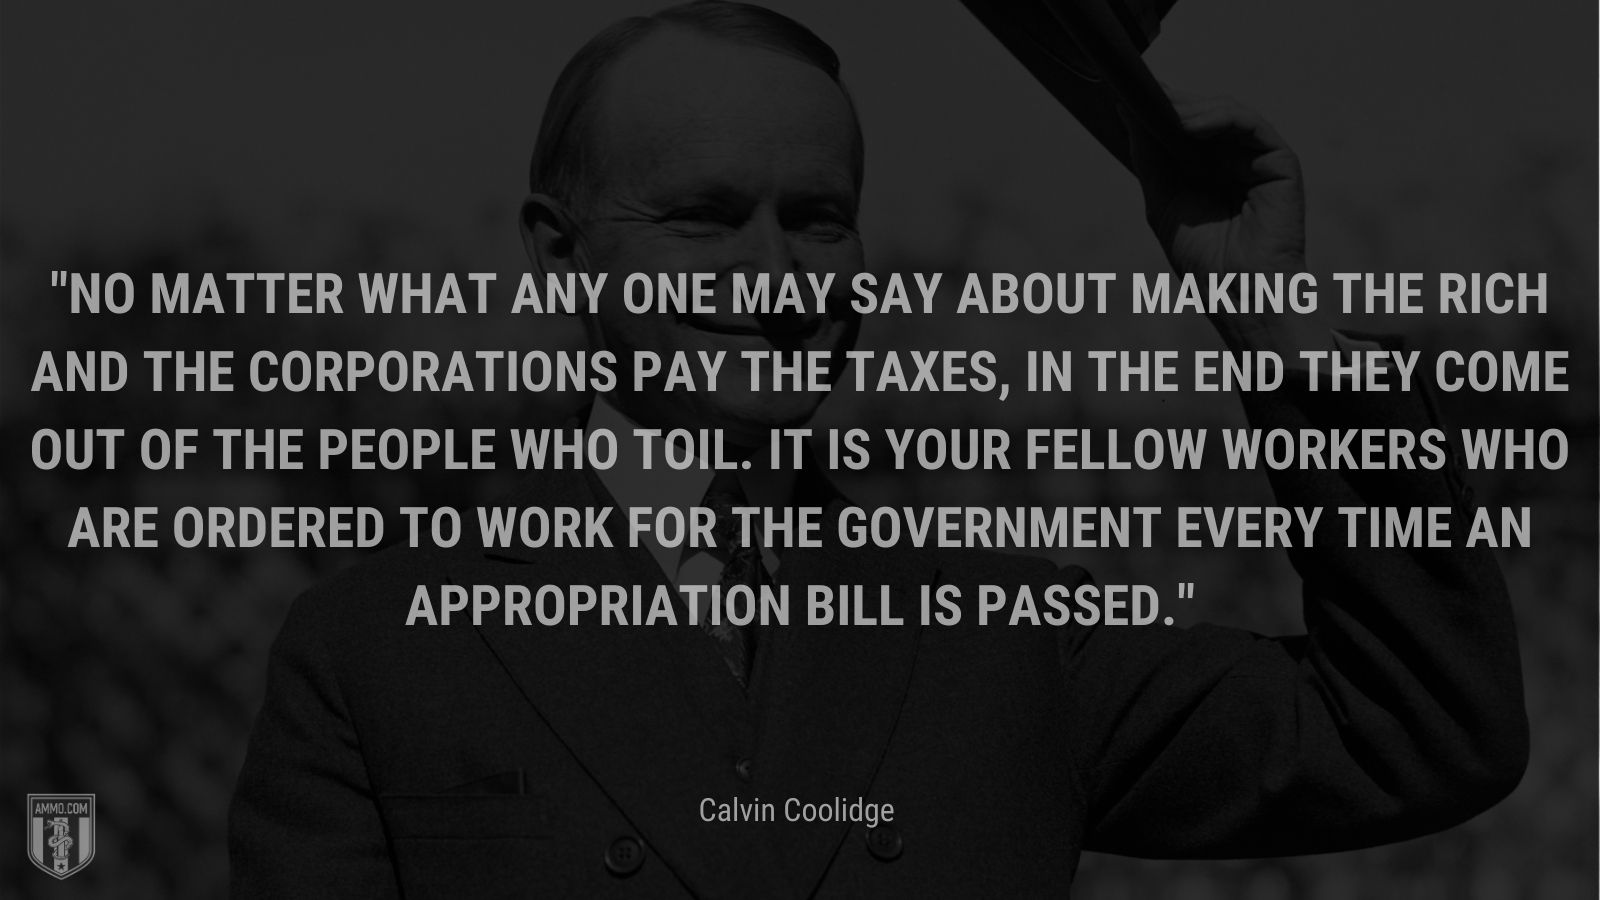 “No matter what any one may say about making the rich and the corporations pay the taxes, in the end they come out of the people who toil. It is your fellow workers who are ordered to work for the Government every time an appropriation bill is passed.” - Calvin Coolidge